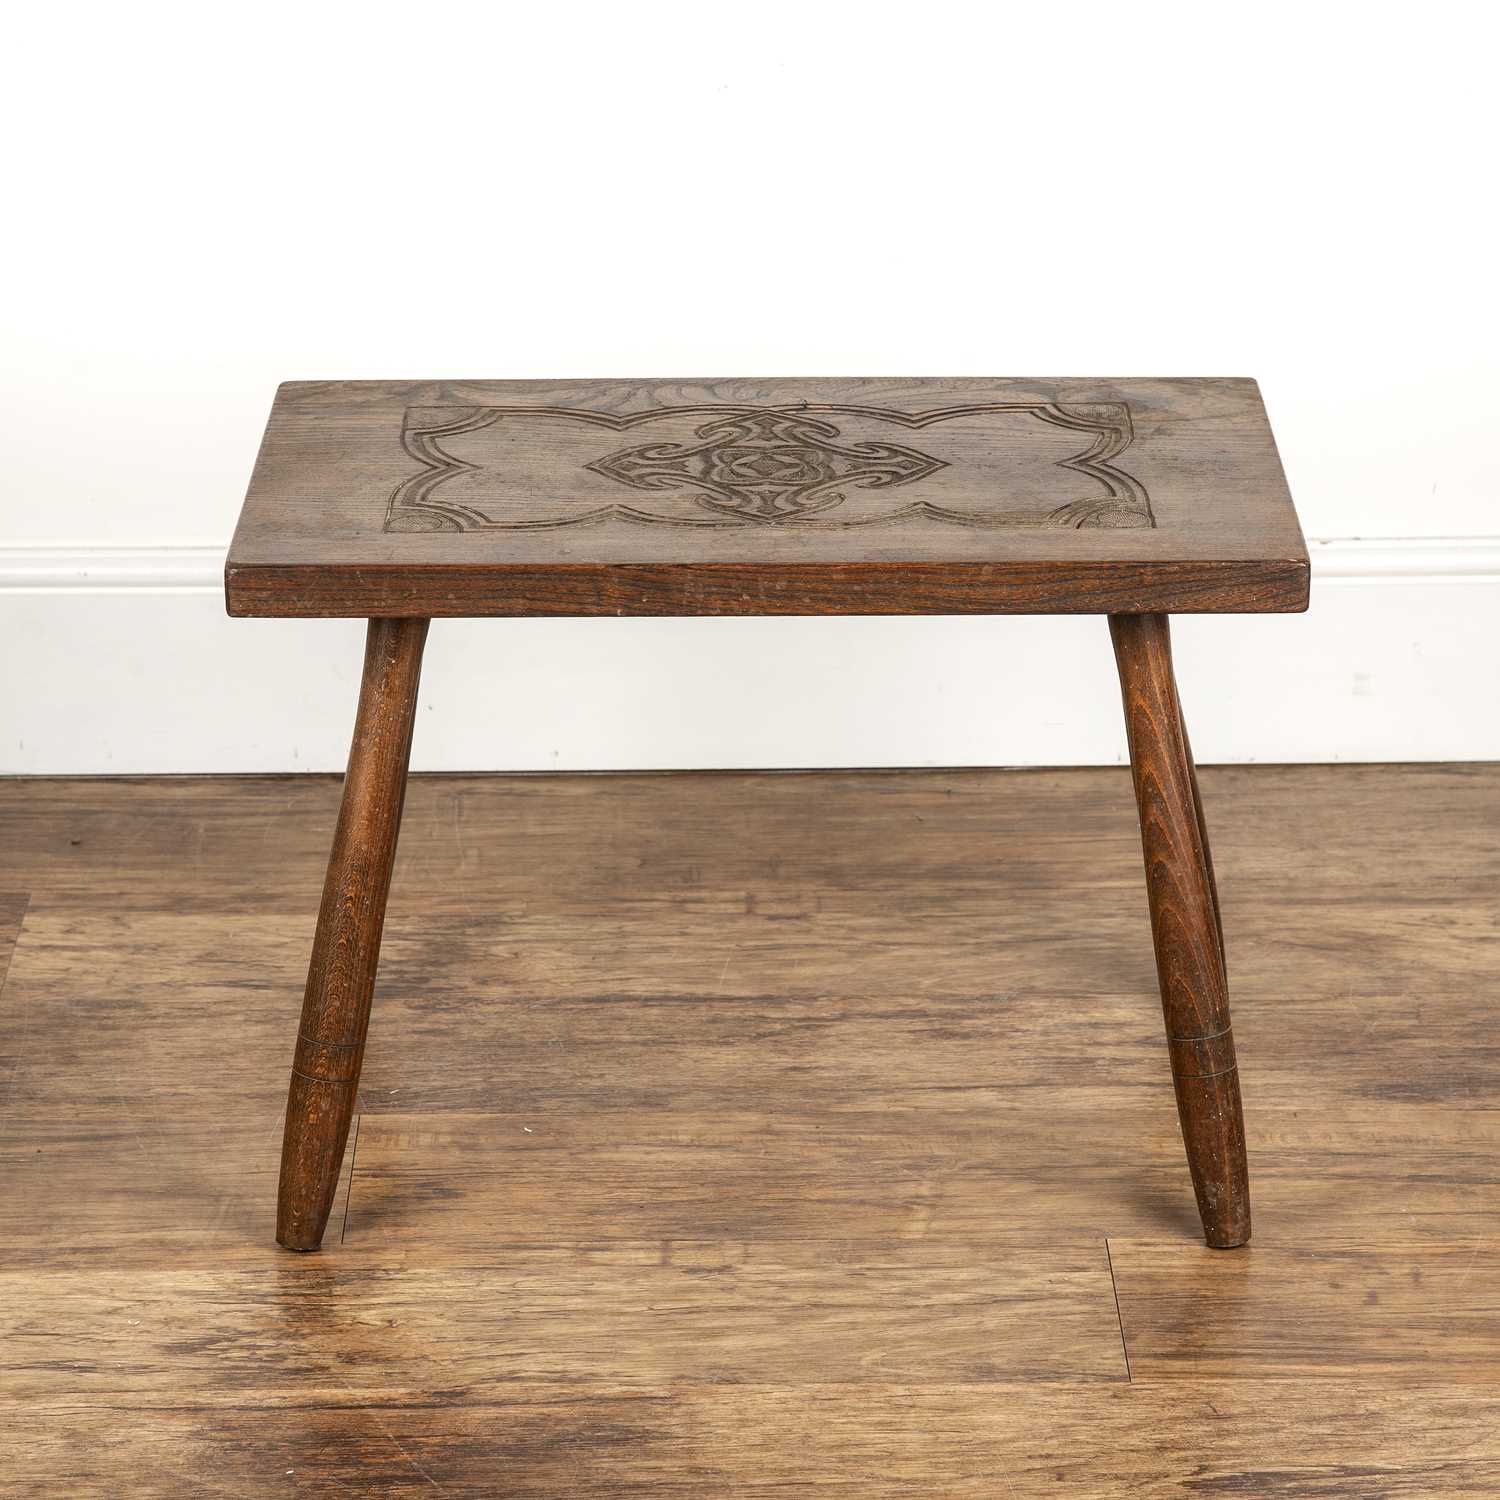 Cotswold School Elm, rectangular table with carved decoration to the top, 61cm wide x 43cm high x